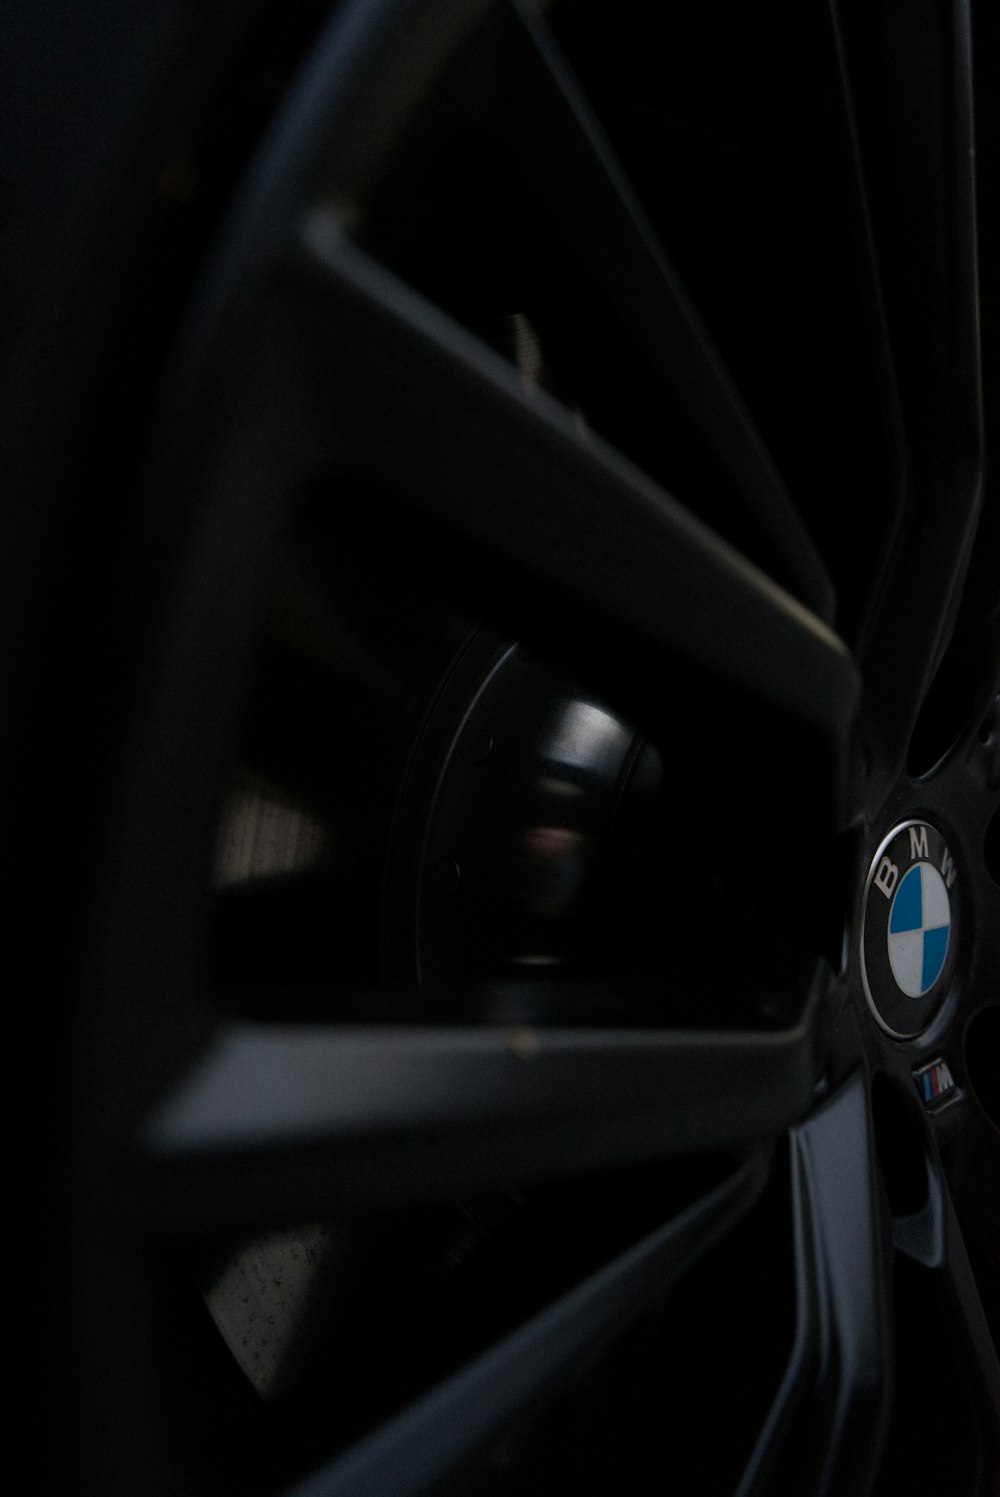 a close up of a bmw wheel with a black background